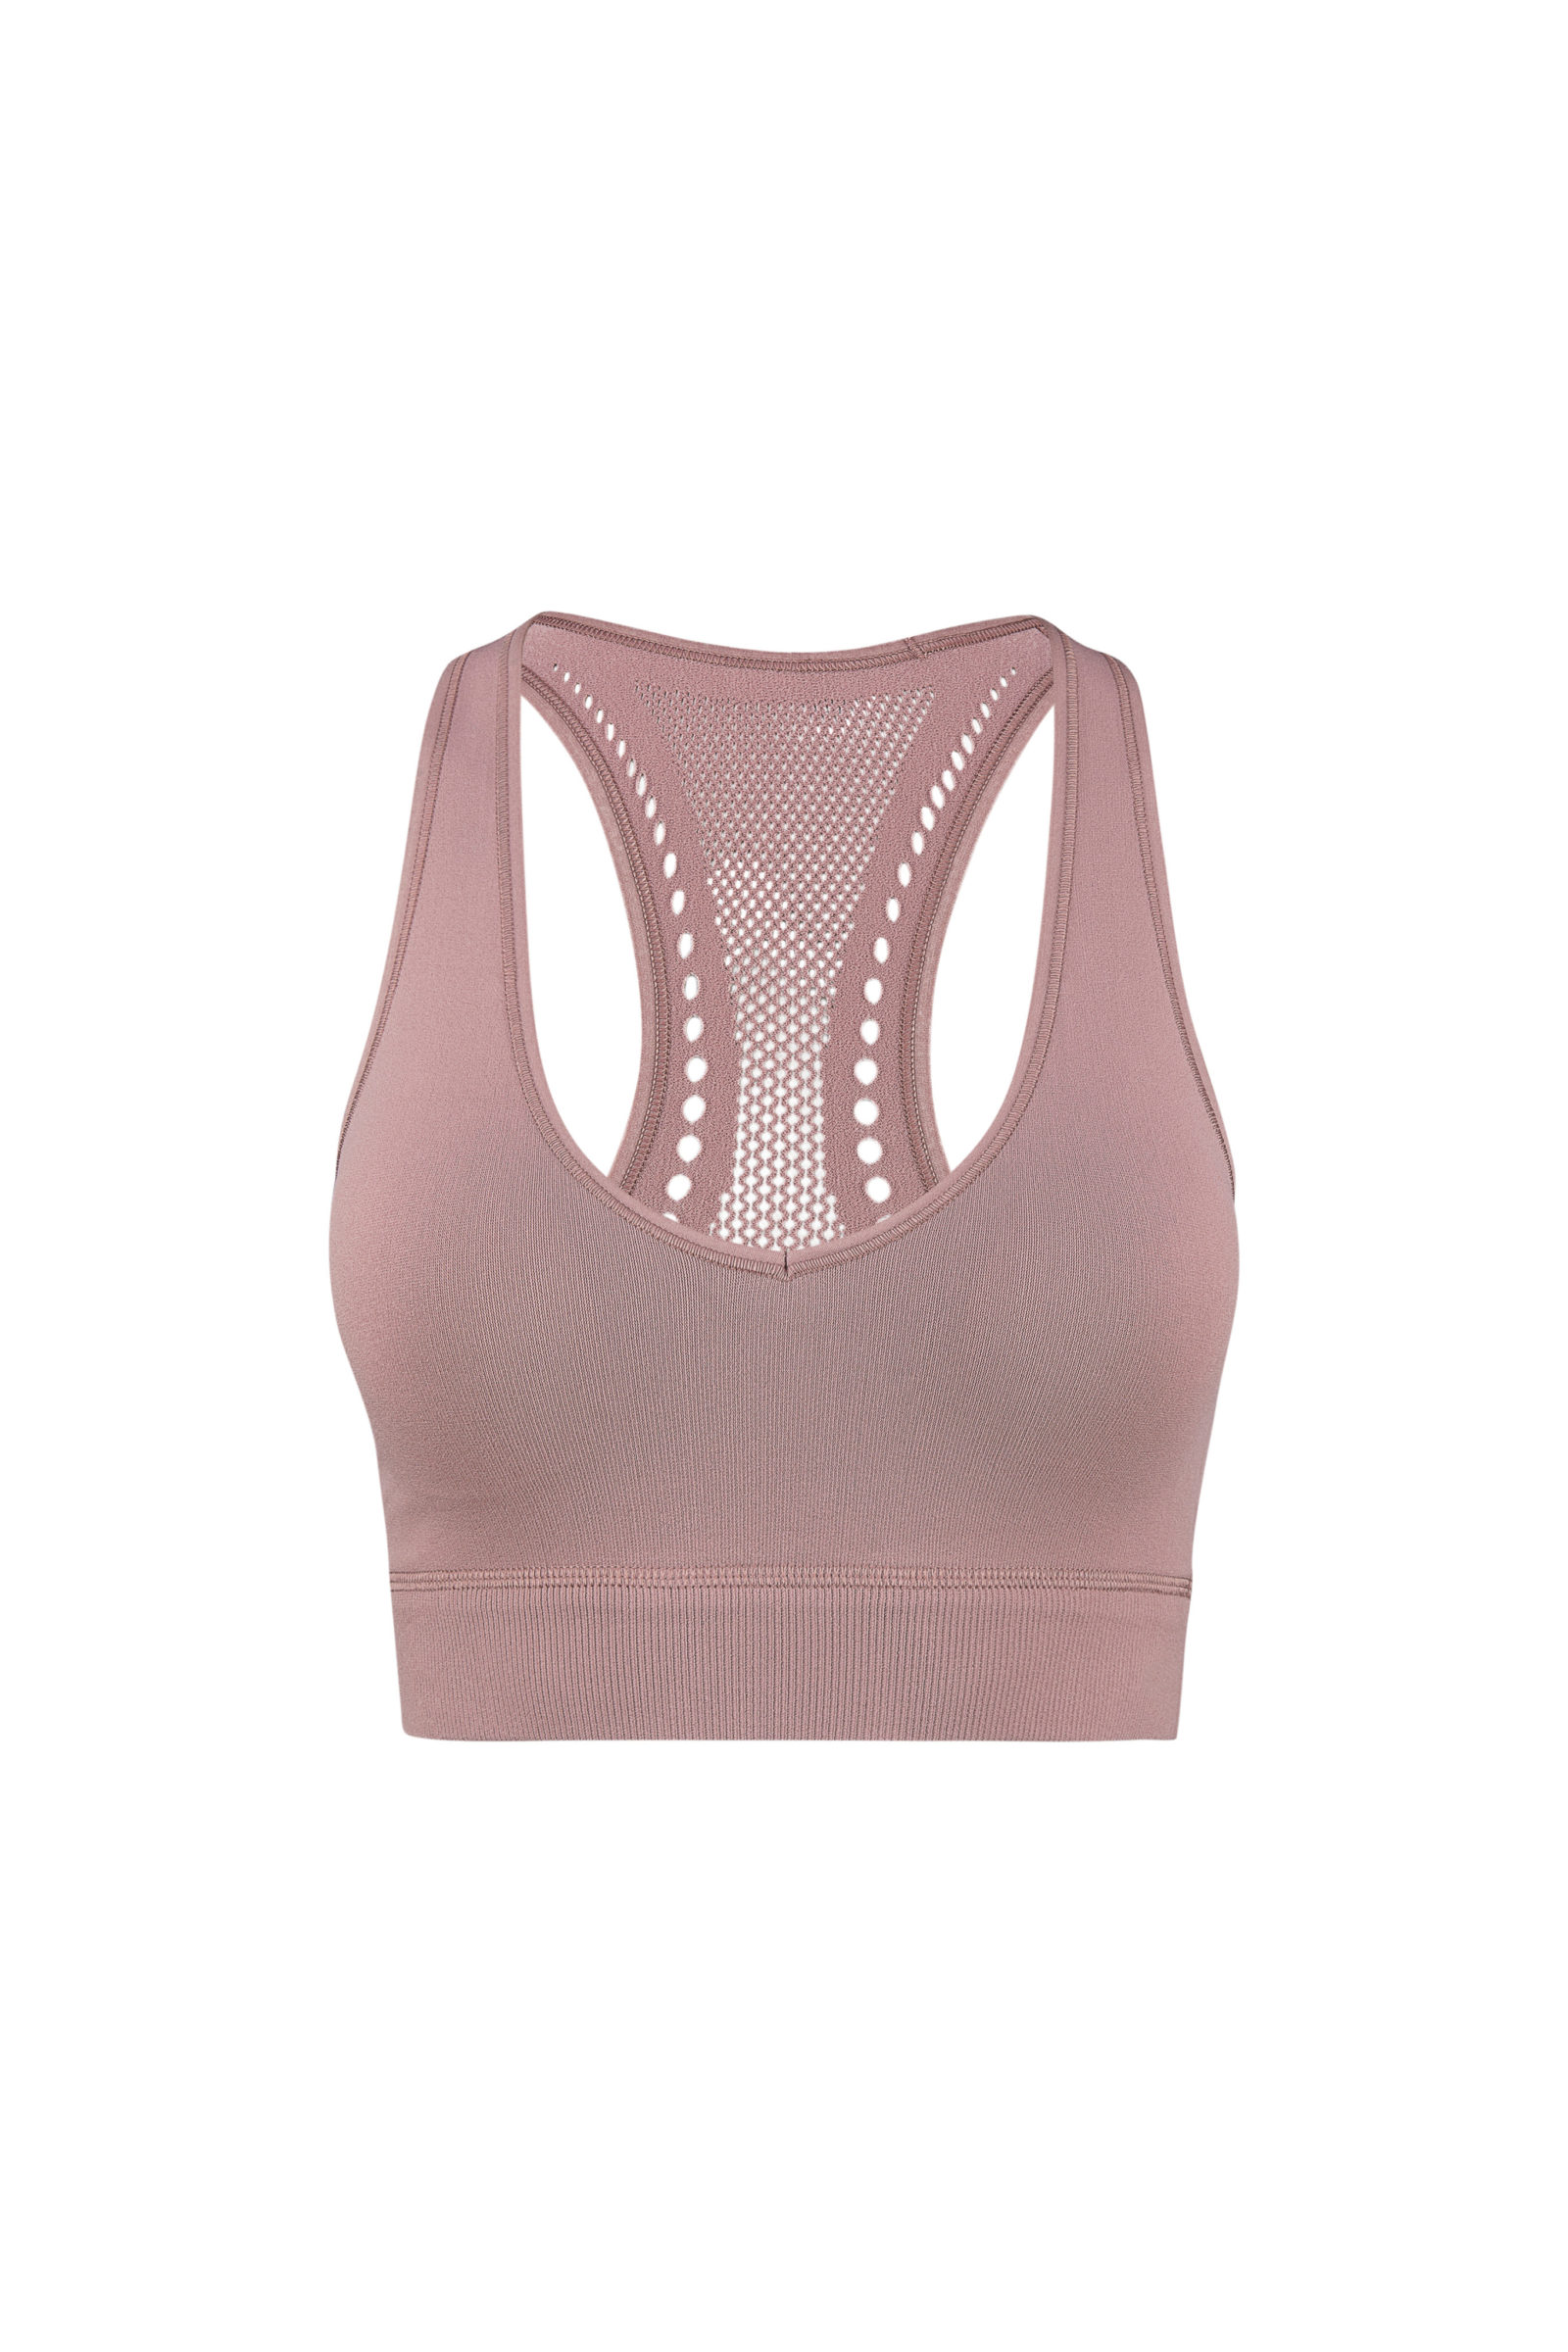 Every Single Piece From the Lululemon Barry's Bootcamp Collection ...